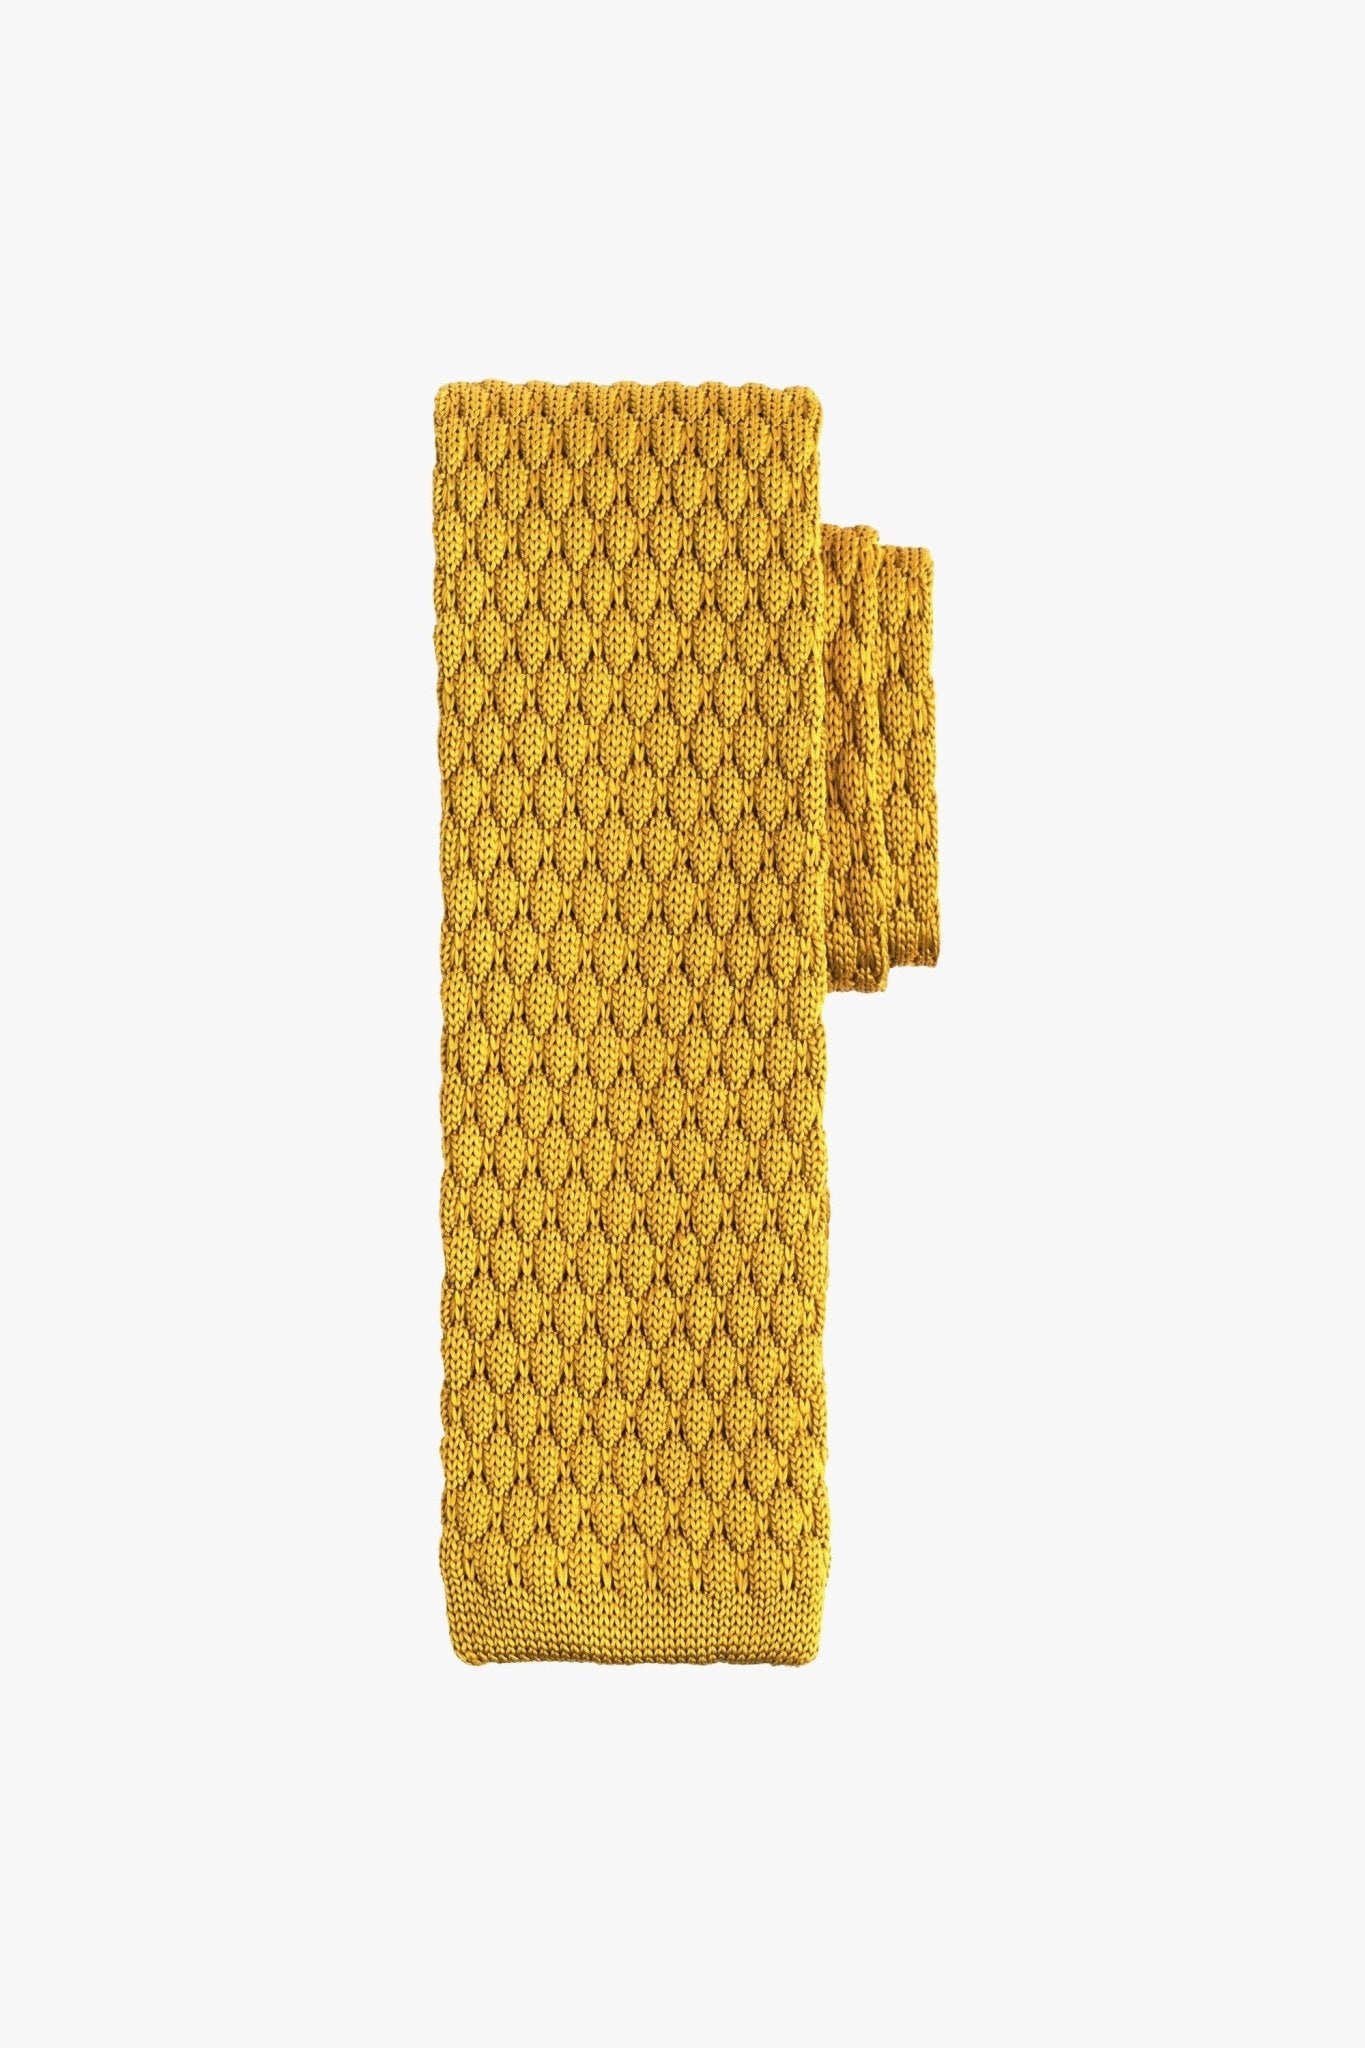 Yellow Knitted Tie - My Suited Life